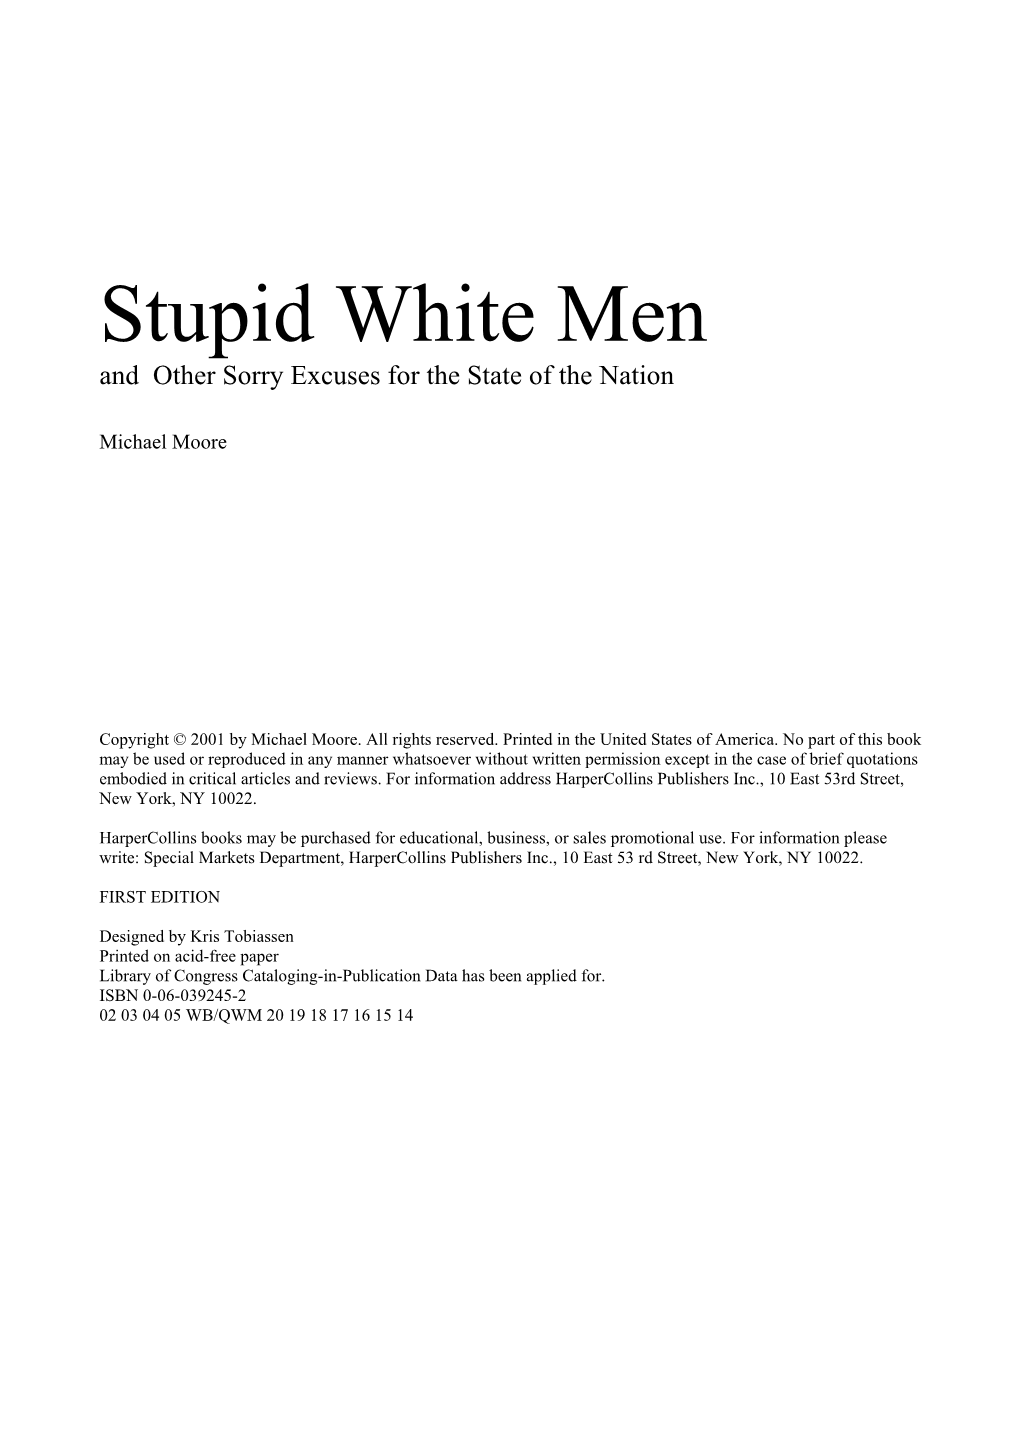 Stupid White Men and Other Sorry Excuses for the State of the Nation